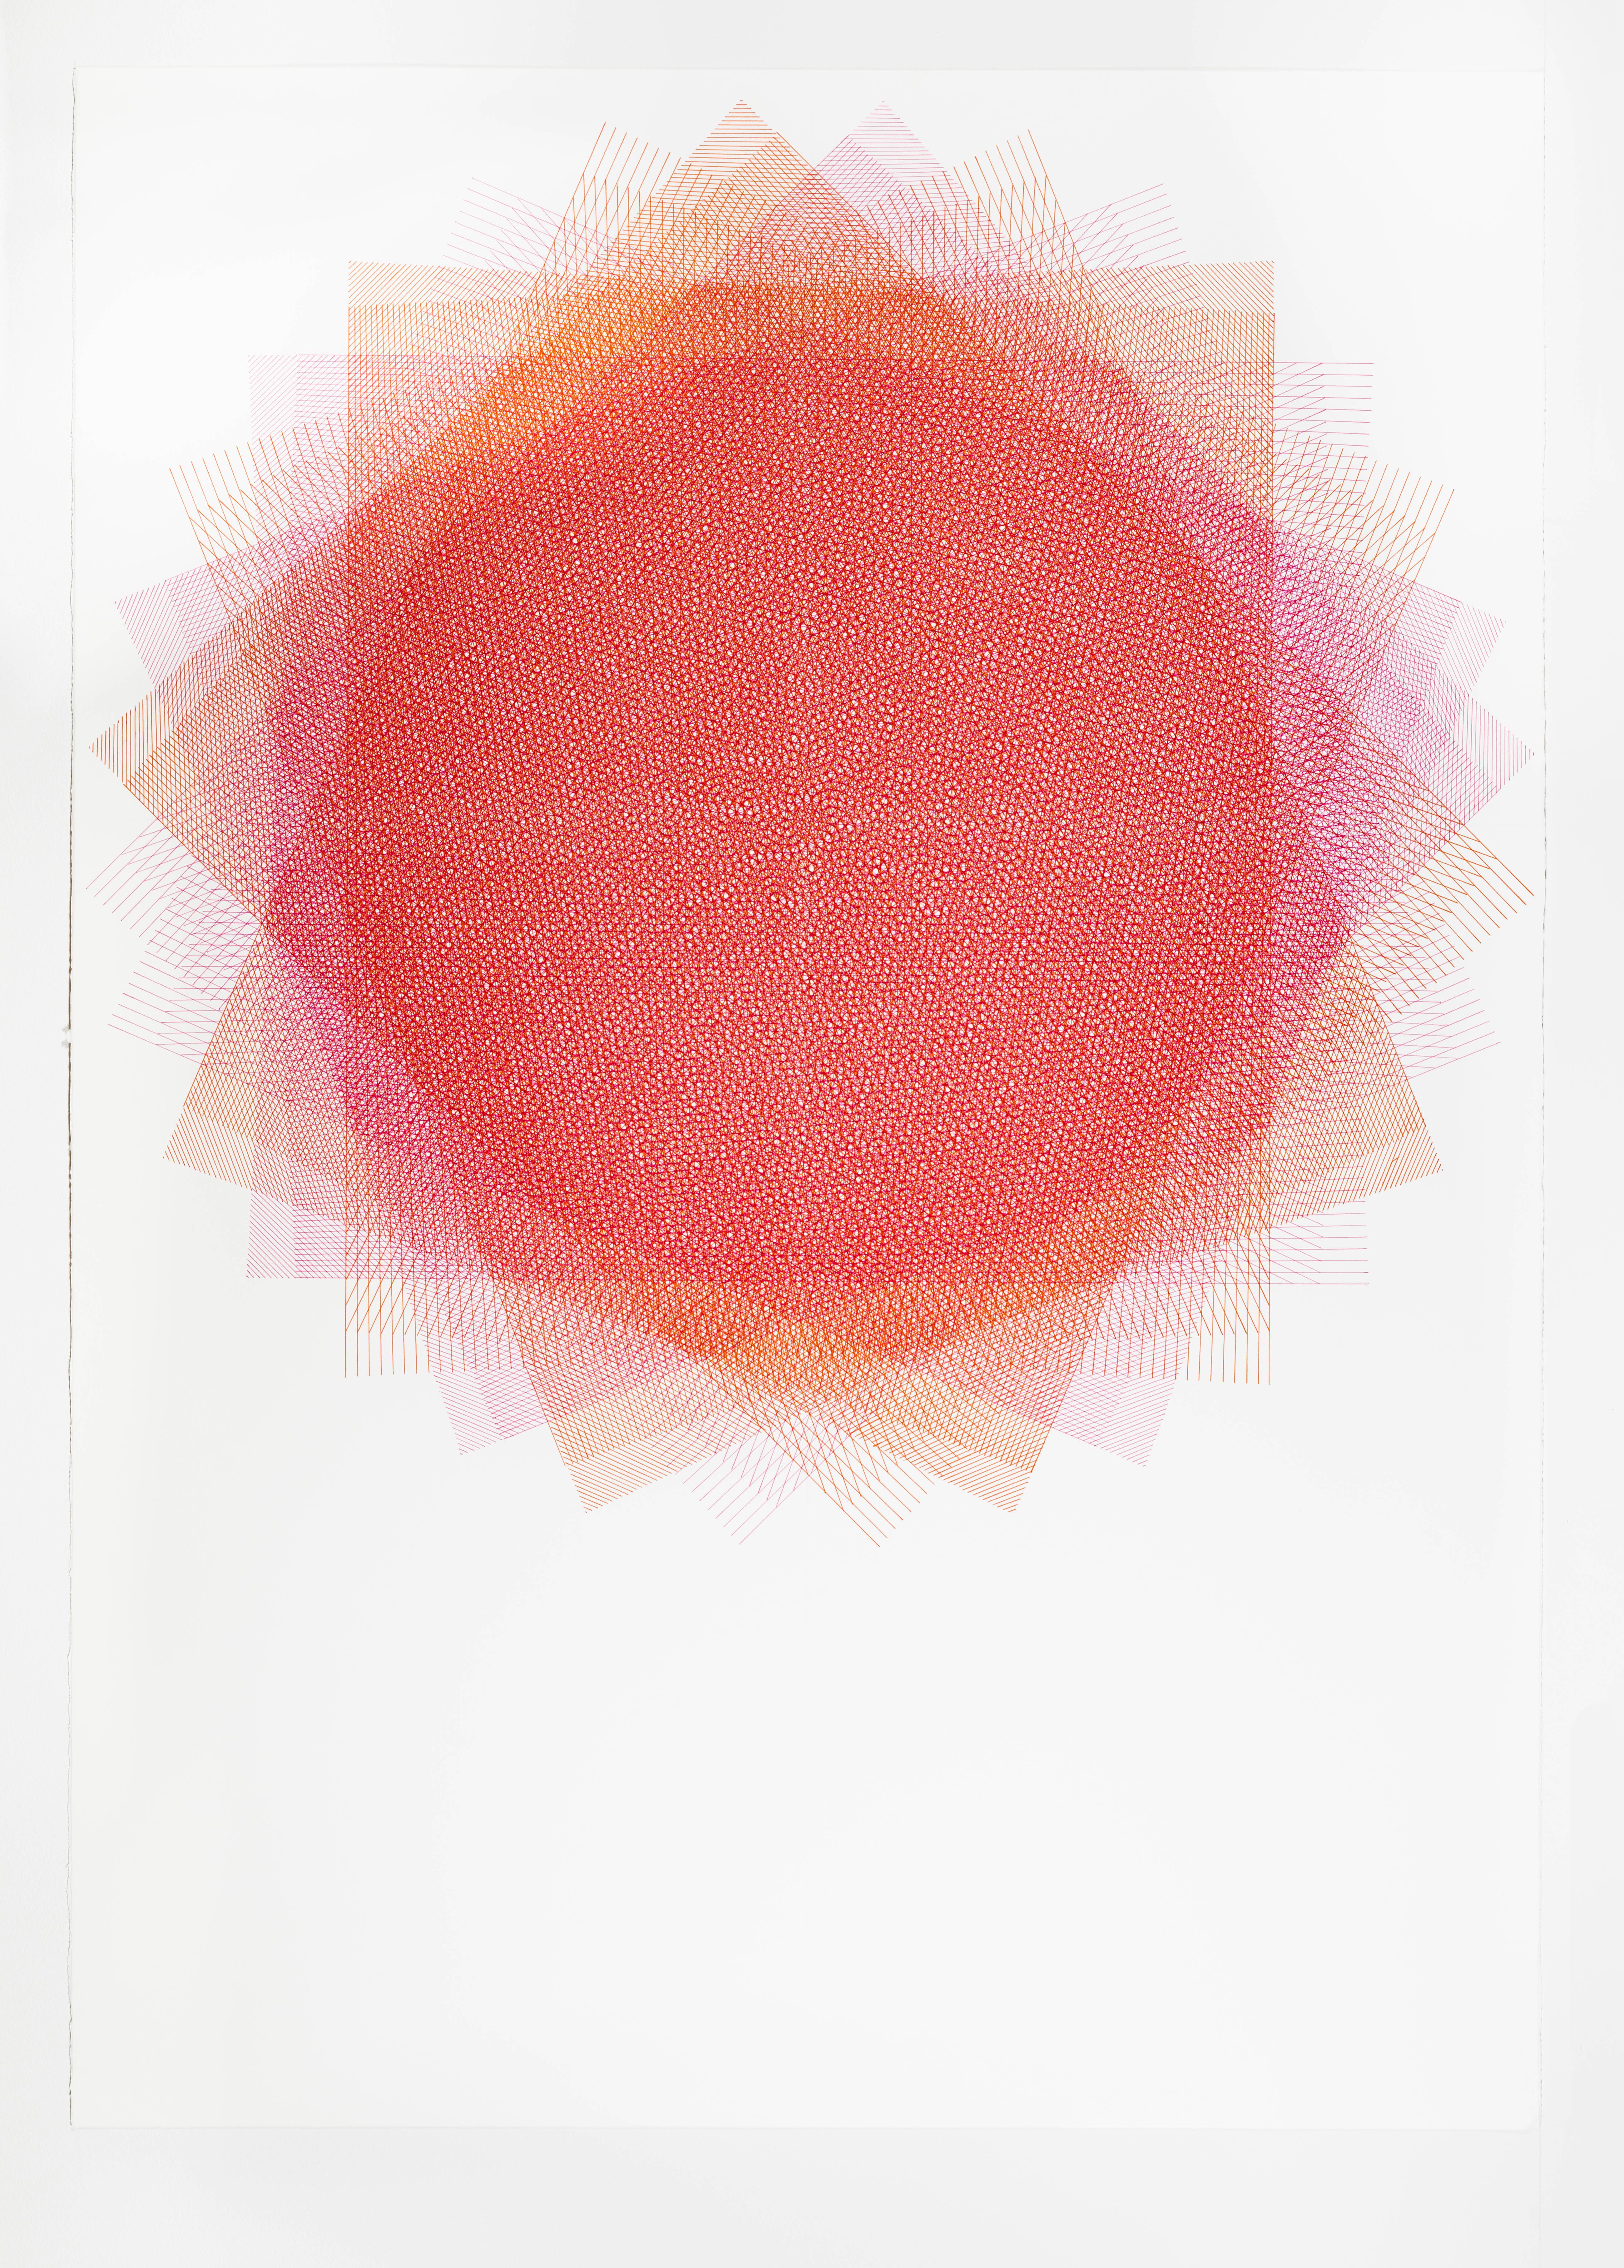 Sara Eichner Abstract Drawing - 32 Layers , Pink and Orange